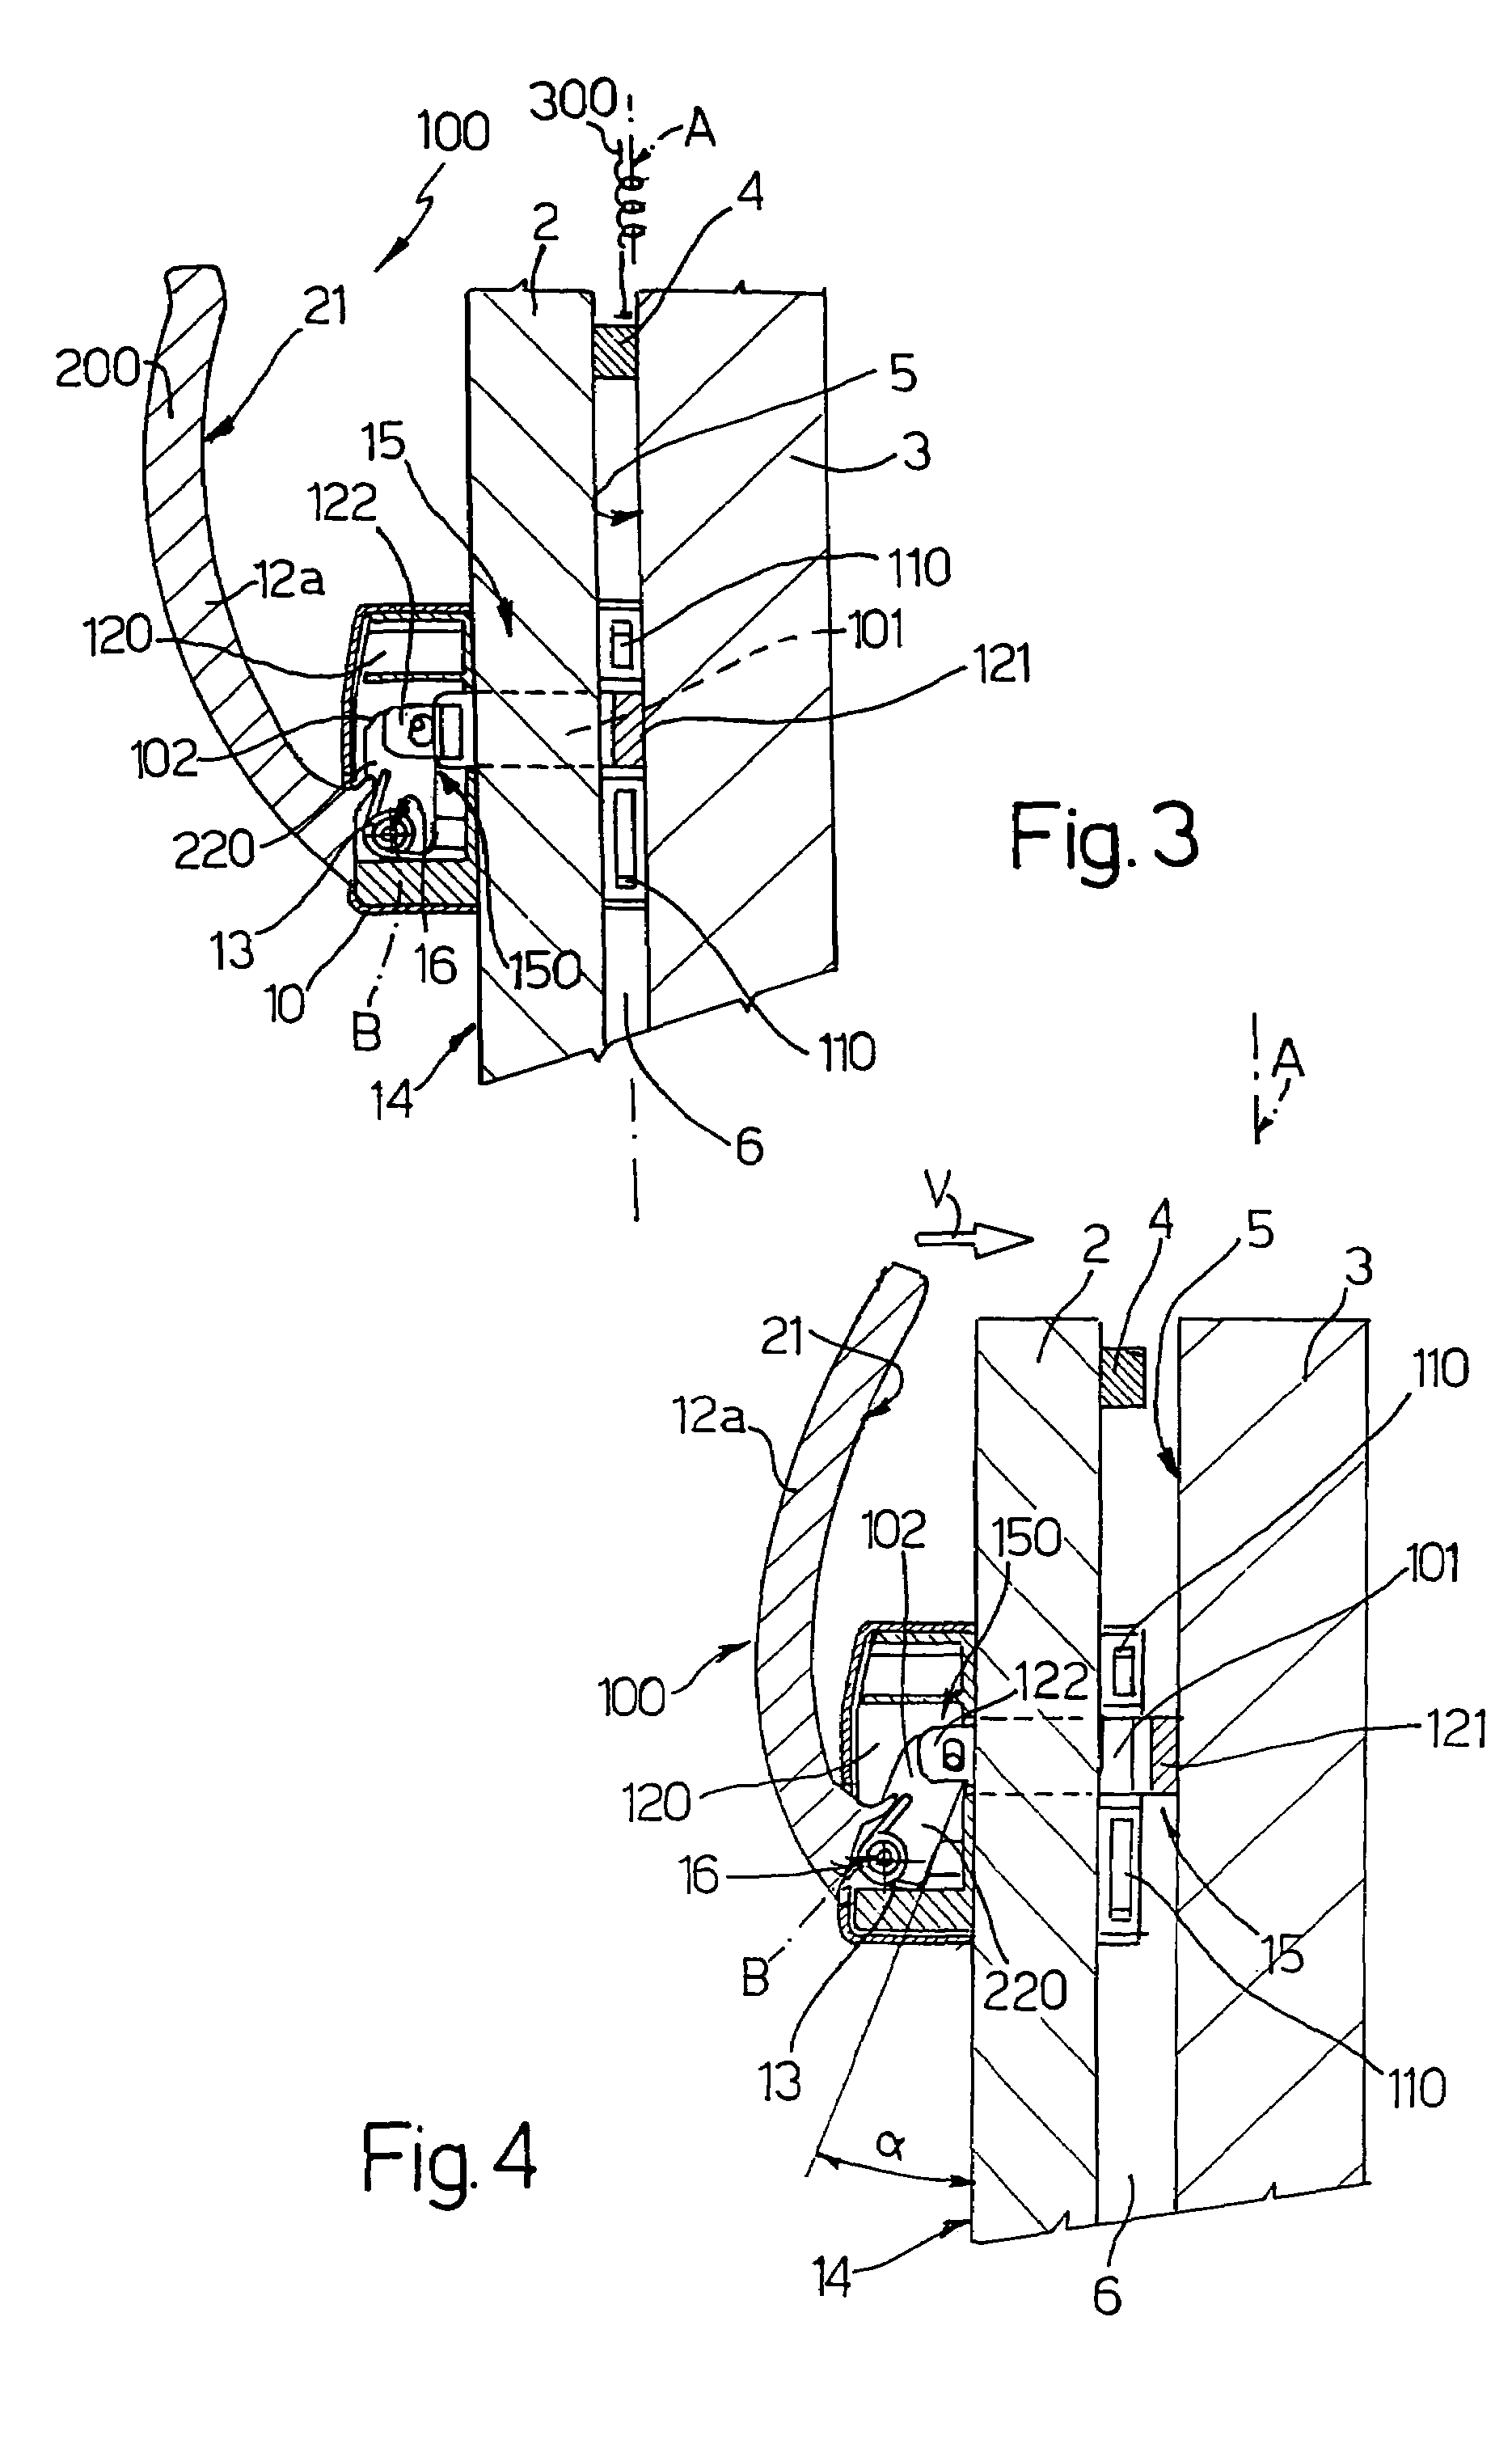 Handle opening device for a door of an electric household appliance, in particular a refrigerator or freezer